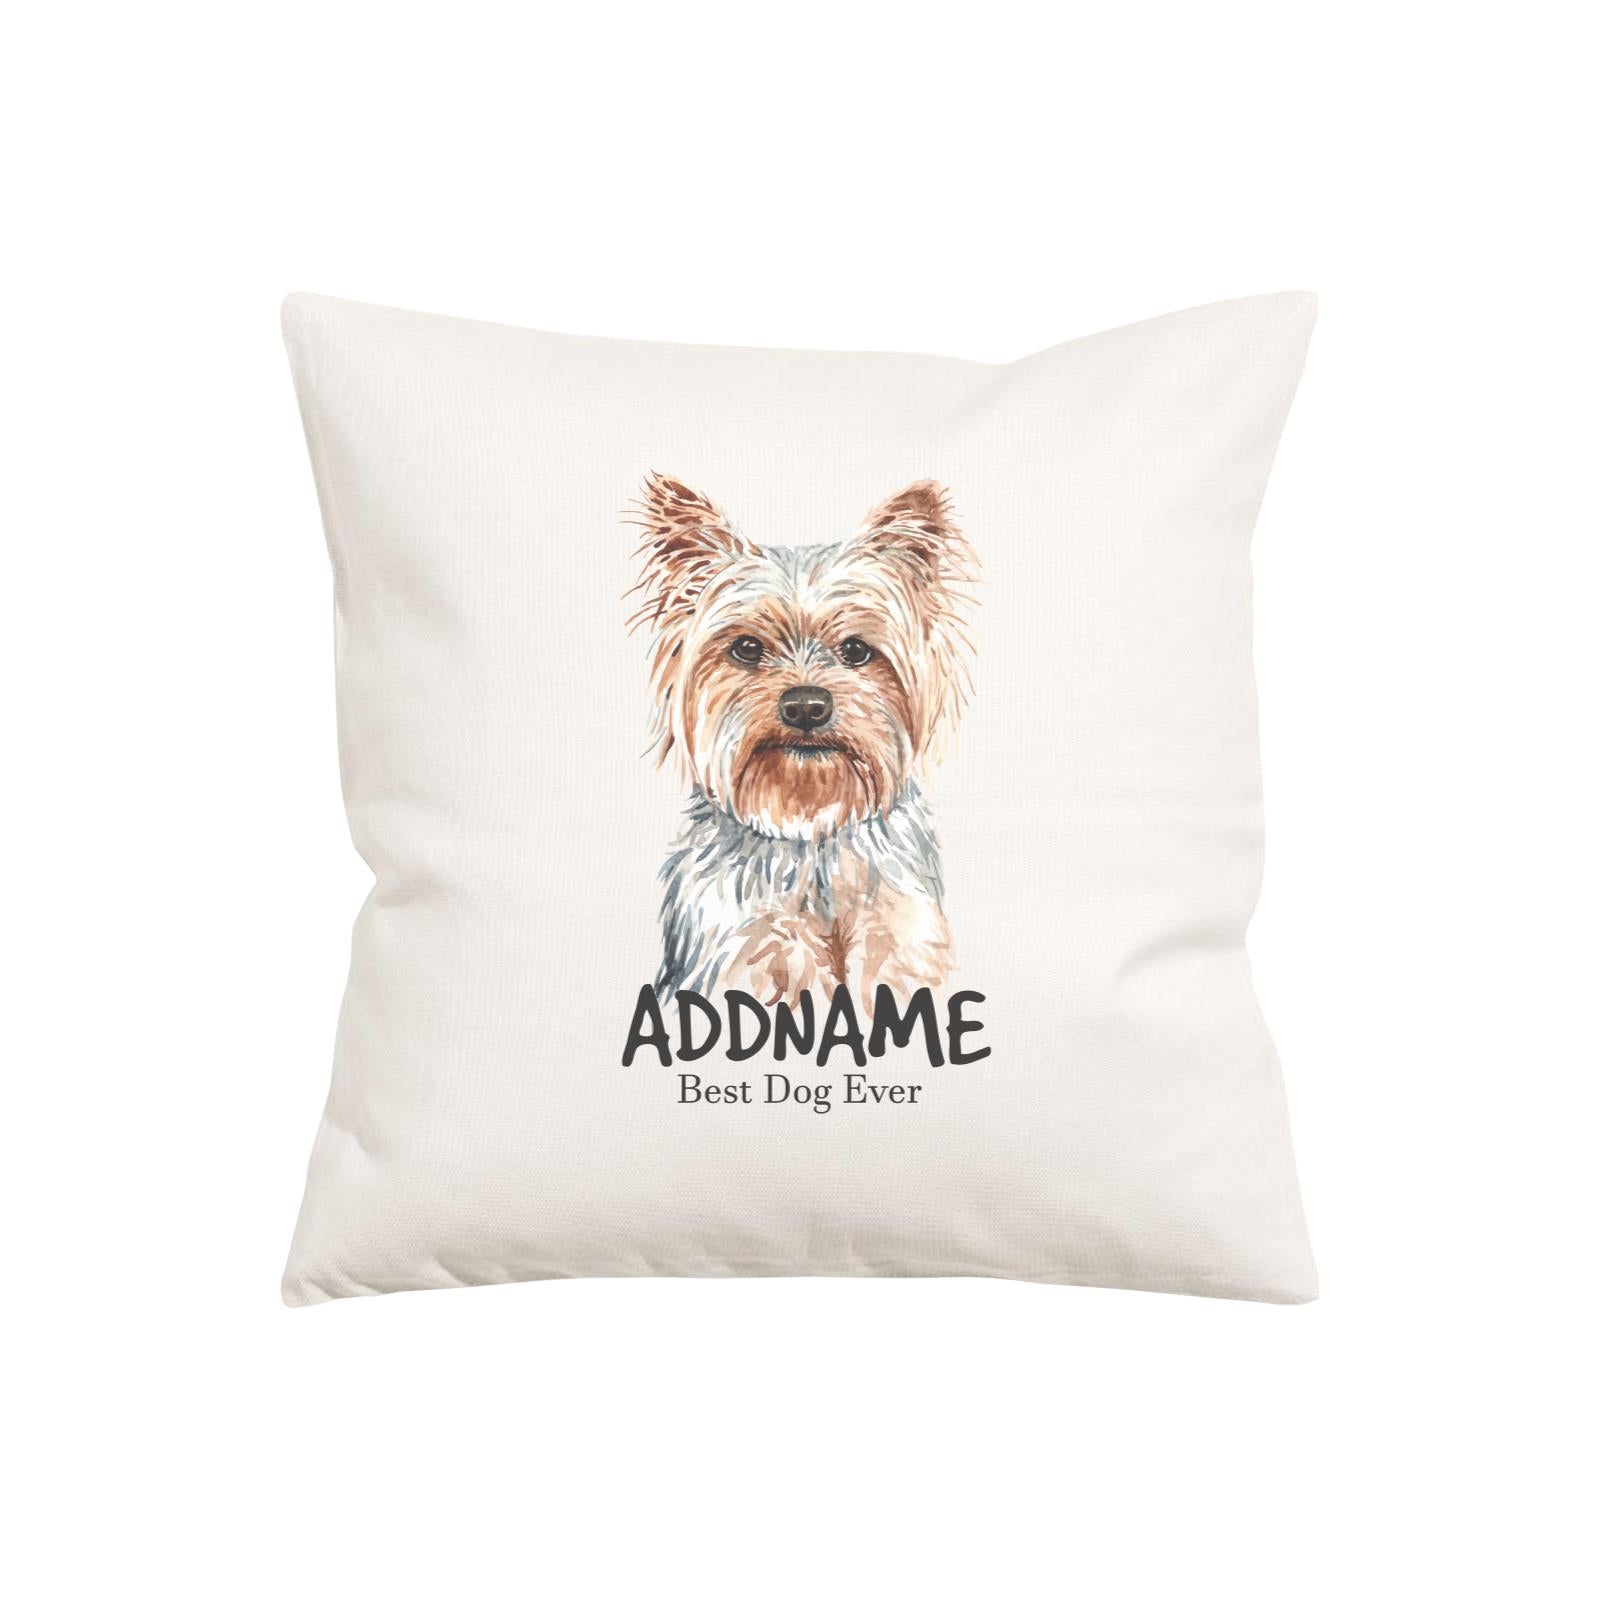 Watercolor Dog Series Yorkshire Terrier Best Dog Ever Addname Pillow Cushion